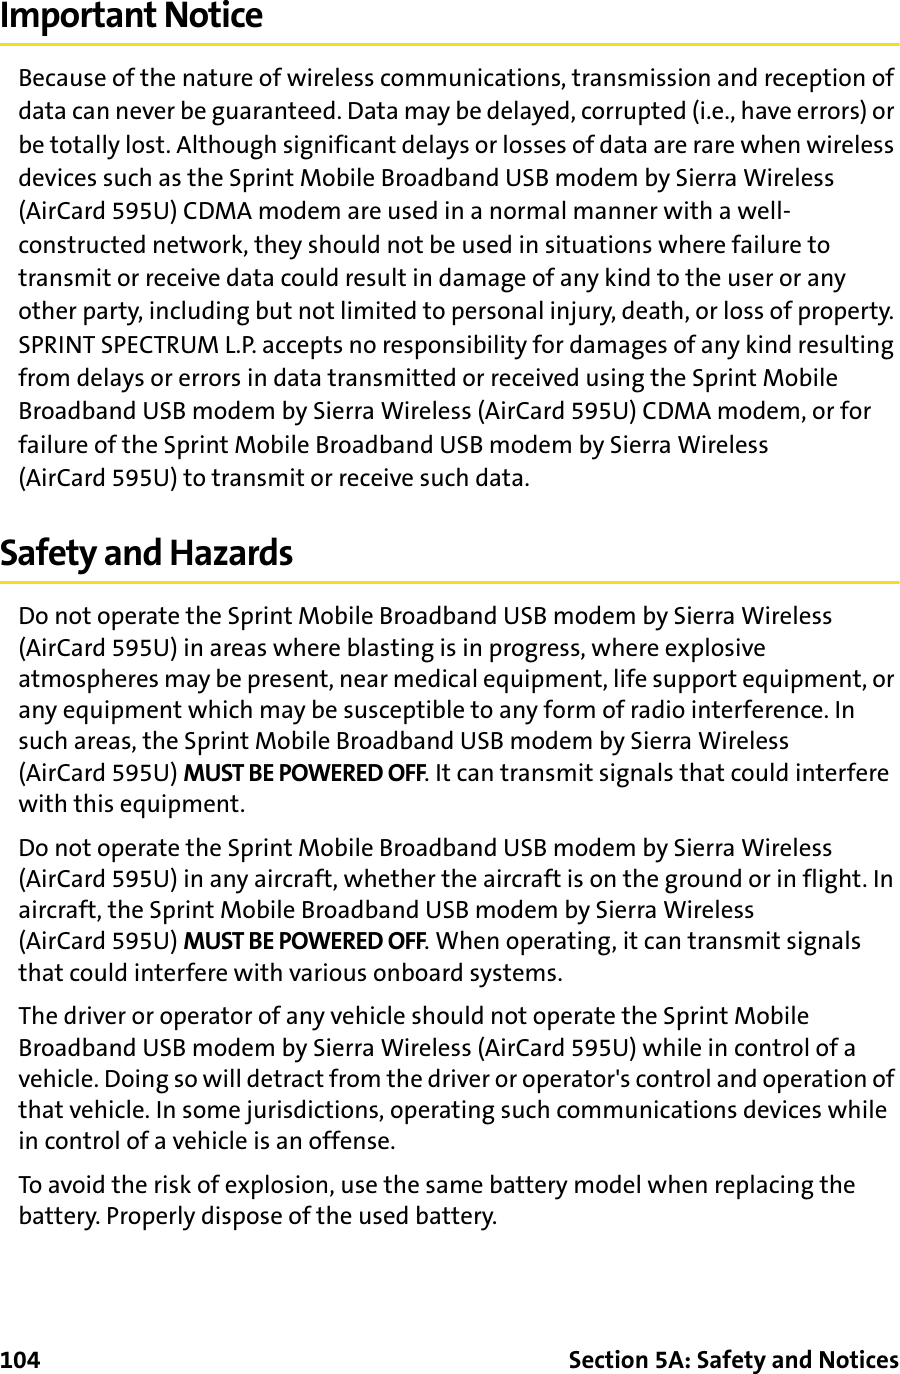 104 Section 5A: Safety and NoticesImportant NoticeBecause of the nature of wireless communications, transmission and reception of data can never be guaranteed. Data may be delayed, corrupted (i.e., have errors) or be totally lost. Although significant delays or losses of data are rare when wireless devices such as the Sprint Mobile Broadband USB modem by Sierra Wireless (AirCard 595U) CDMA modem are used in a normal manner with a well-constructed network, they should not be used in situations where failure to transmit or receive data could result in damage of any kind to the user or any other party, including but not limited to personal injury, death, or loss of property. SPRINT SPECTRUM L.P. accepts no responsibility for damages of any kind resulting from delays or errors in data transmitted or received using the Sprint Mobile Broadband USB modem by Sierra Wireless (AirCard 595U) CDMA modem, or for failure of the Sprint Mobile Broadband USB modem by Sierra Wireless (AirCard 595U) to transmit or receive such data.Safety and HazardsDo not operate the Sprint Mobile Broadband USB modem by Sierra Wireless (AirCard 595U) in areas where blasting is in progress, where explosive atmospheres may be present, near medical equipment, life support equipment, or any equipment which may be susceptible to any form of radio interference. In such areas, the Sprint Mobile Broadband USB modem by Sierra Wireless (AirCard 595U) MUST BE POWERED OFF. It can transmit signals that could interfere with this equipment.Do not operate the Sprint Mobile Broadband USB modem by Sierra Wireless (AirCard 595U) in any aircraft, whether the aircraft is on the ground or in flight. In aircraft, the Sprint Mobile Broadband USB modem by Sierra Wireless (AirCard 595U) MUST BE POWERED OFF. When operating, it can transmit signals that could interfere with various onboard systems.The driver or operator of any vehicle should not operate the Sprint Mobile Broadband USB modem by Sierra Wireless (AirCard 595U) while in control of a vehicle. Doing so will detract from the driver or operator&apos;s control and operation of that vehicle. In some jurisdictions, operating such communications devices while in control of a vehicle is an offense.To avoid the risk of explosion, use the same battery model when replacing the battery. Properly dispose of the used battery.